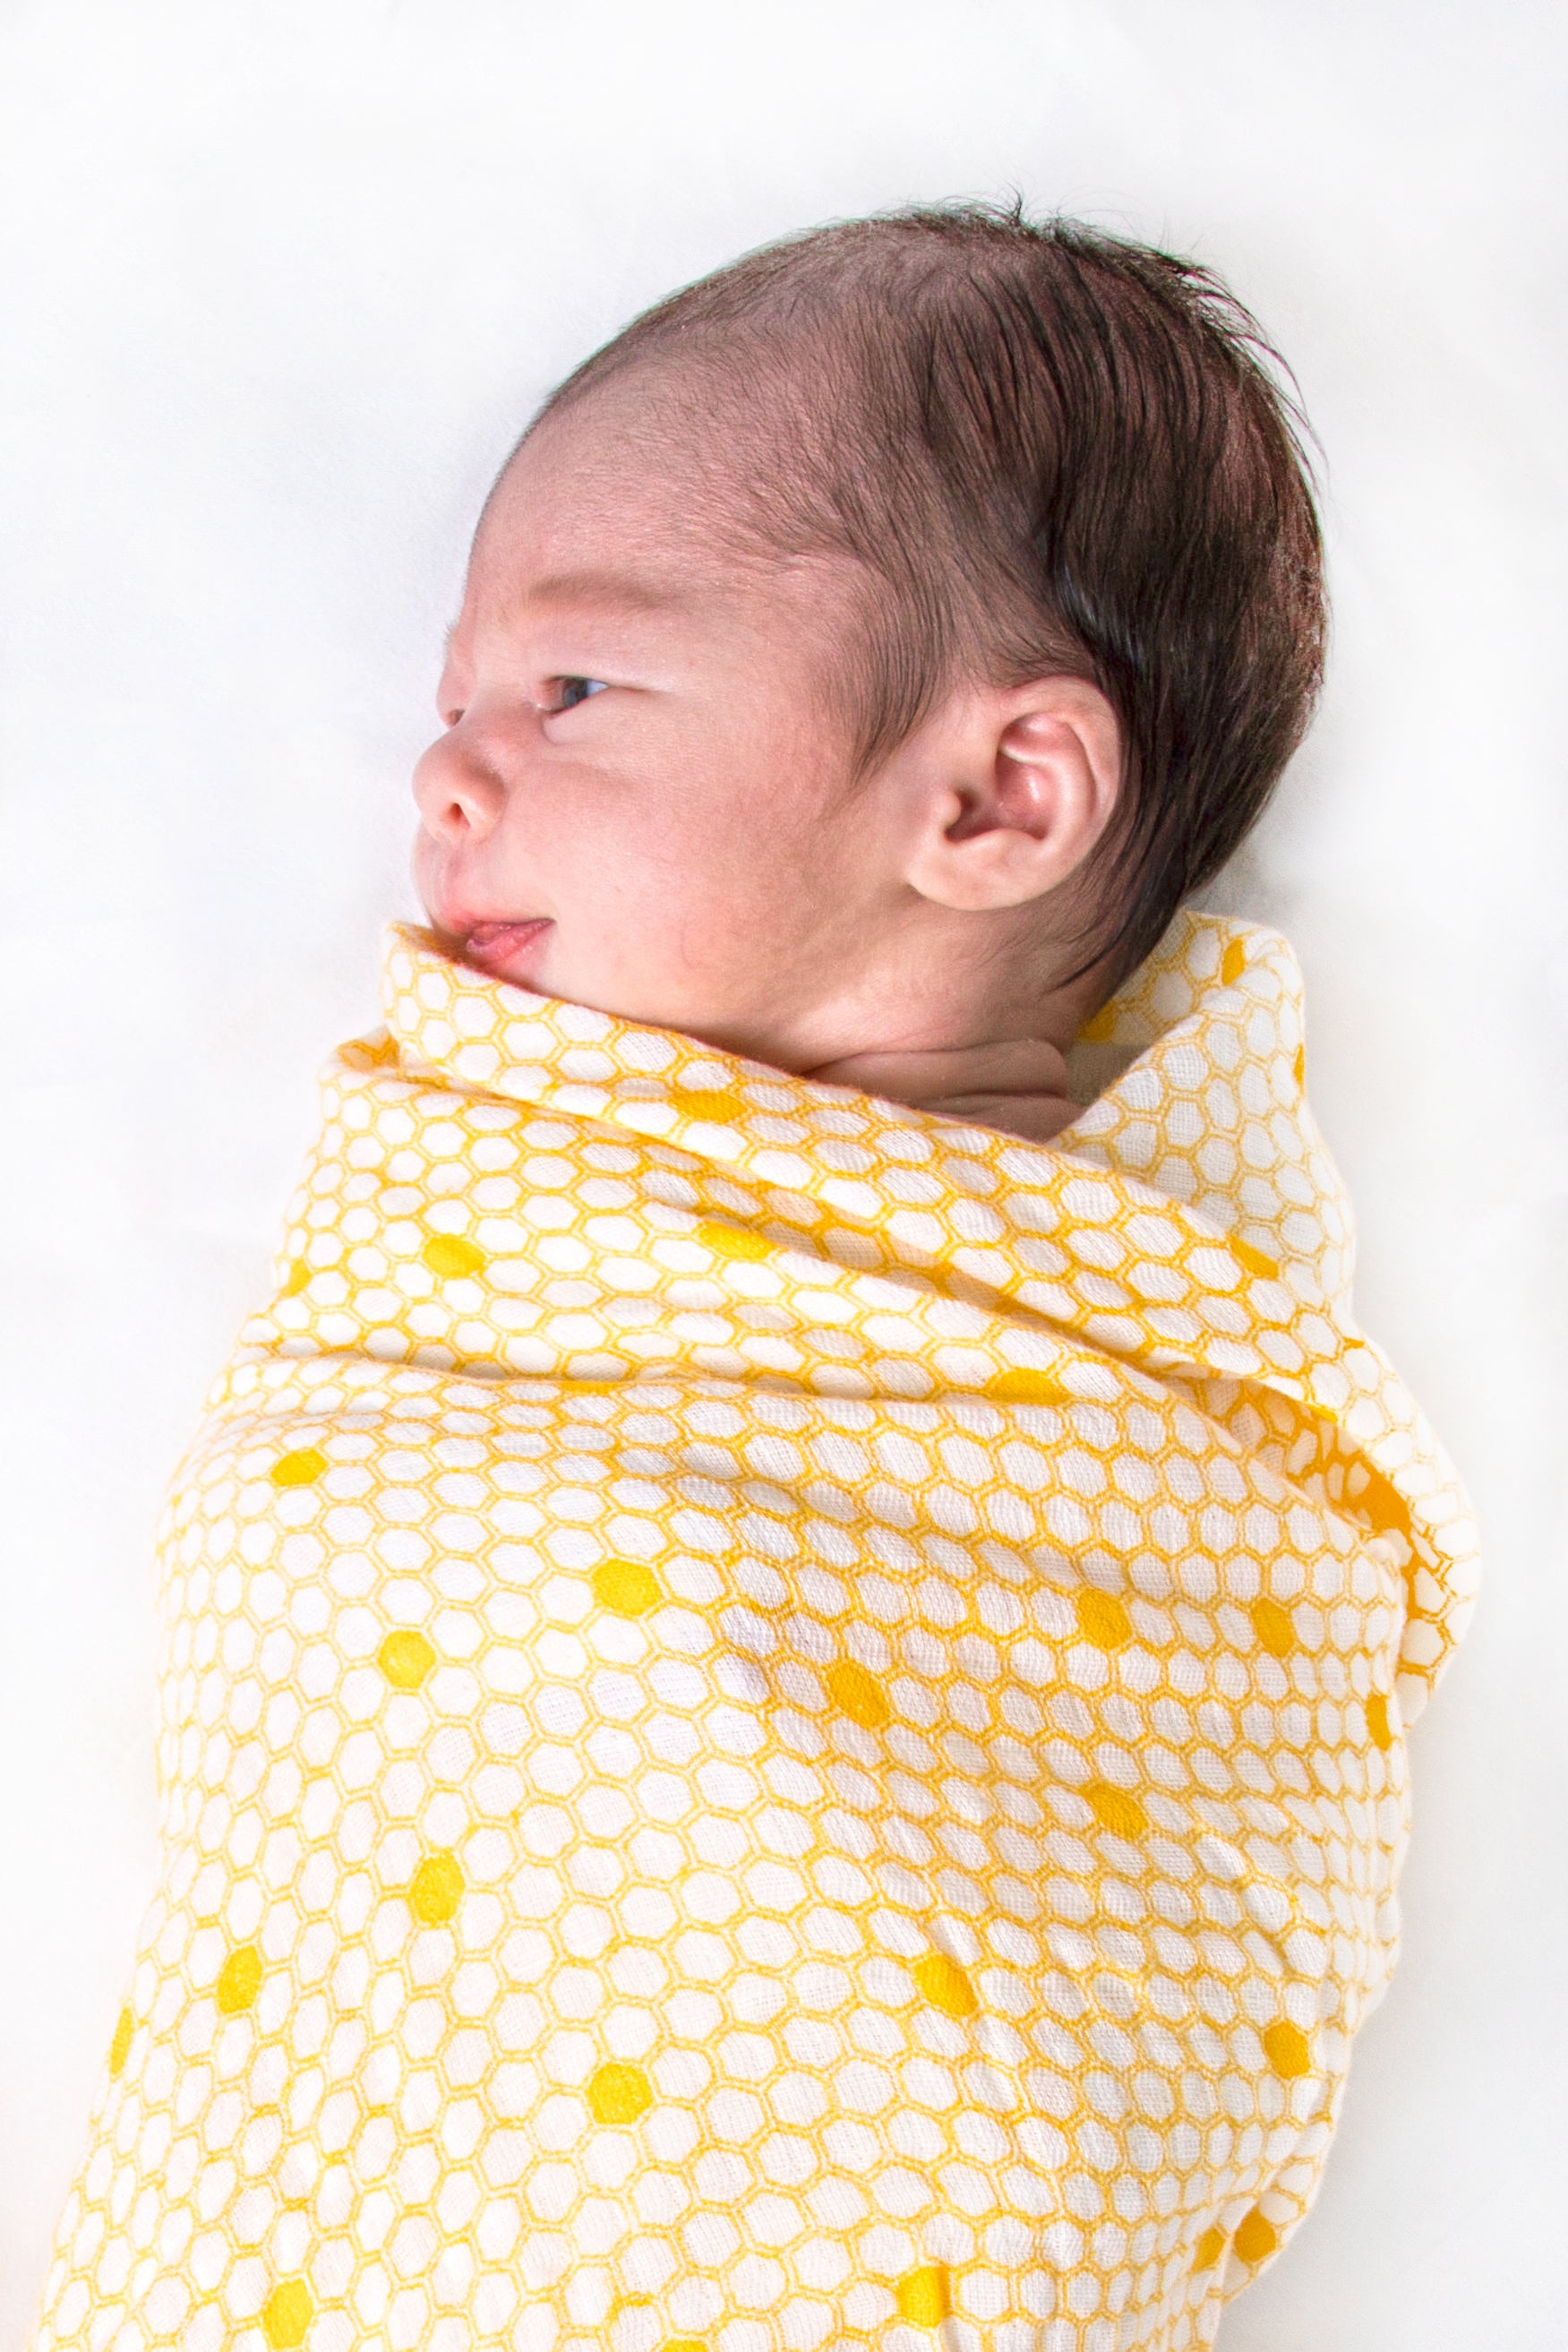 Malabar baby's 100% GOTS certified organic cotton super soft baby swaddle 2 pack. Swaddles get softer after every wash. The perfect newborn and baby shower gift.